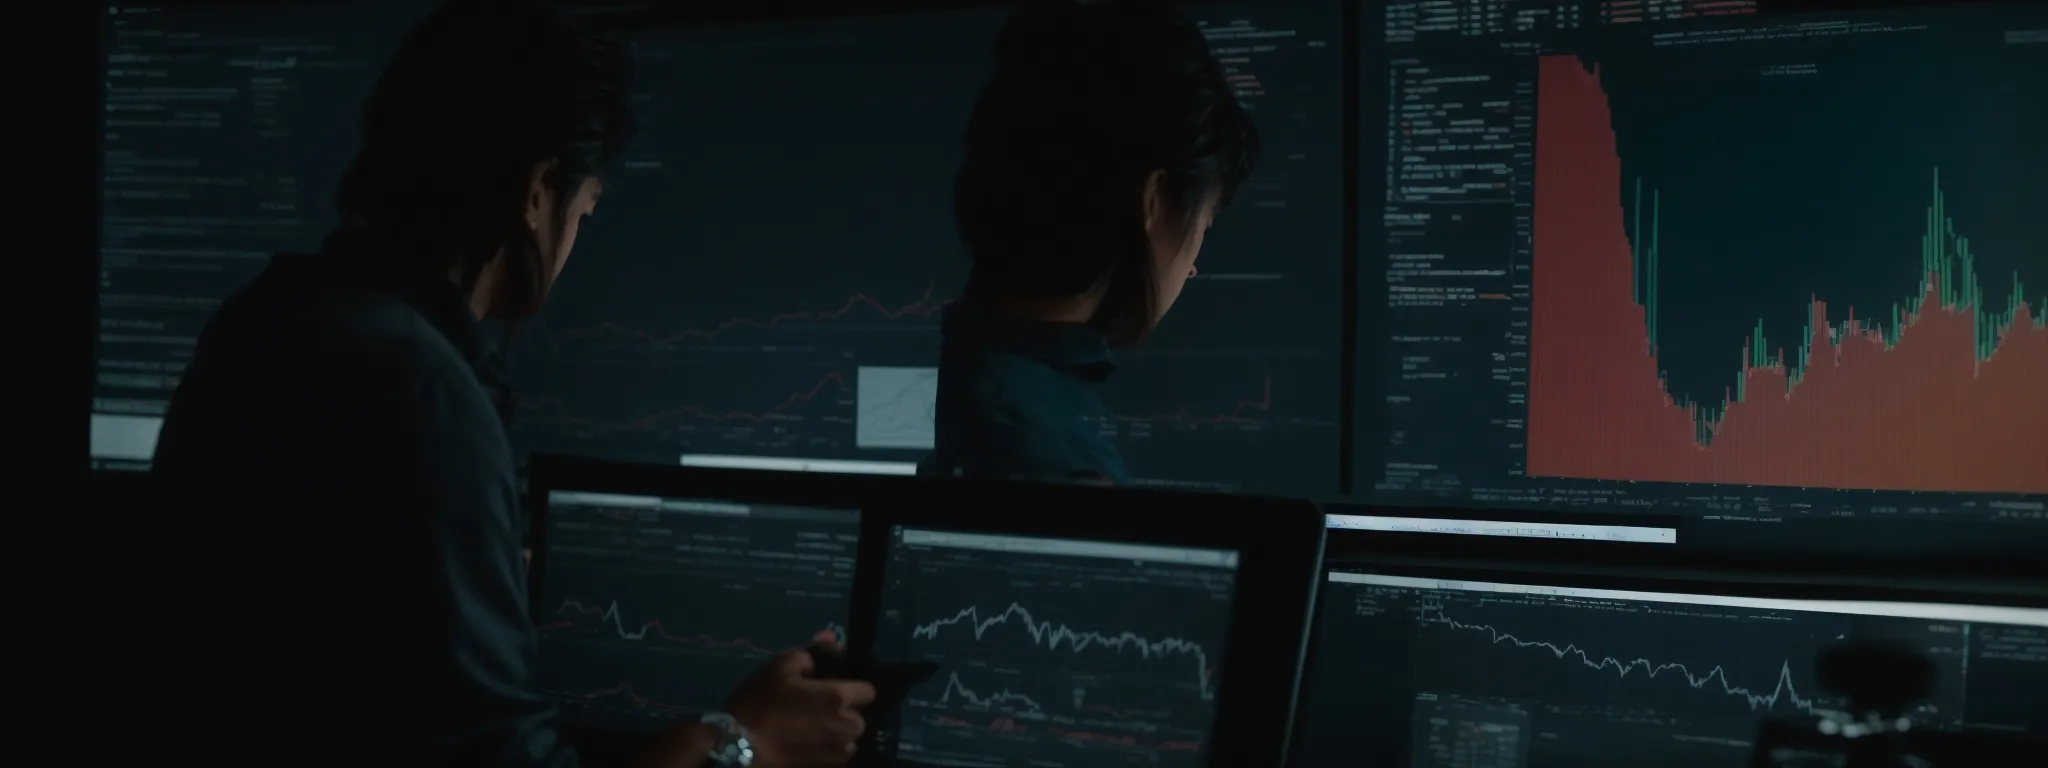 a person analyzing graphs and charts on a computer screen to optimize website content.